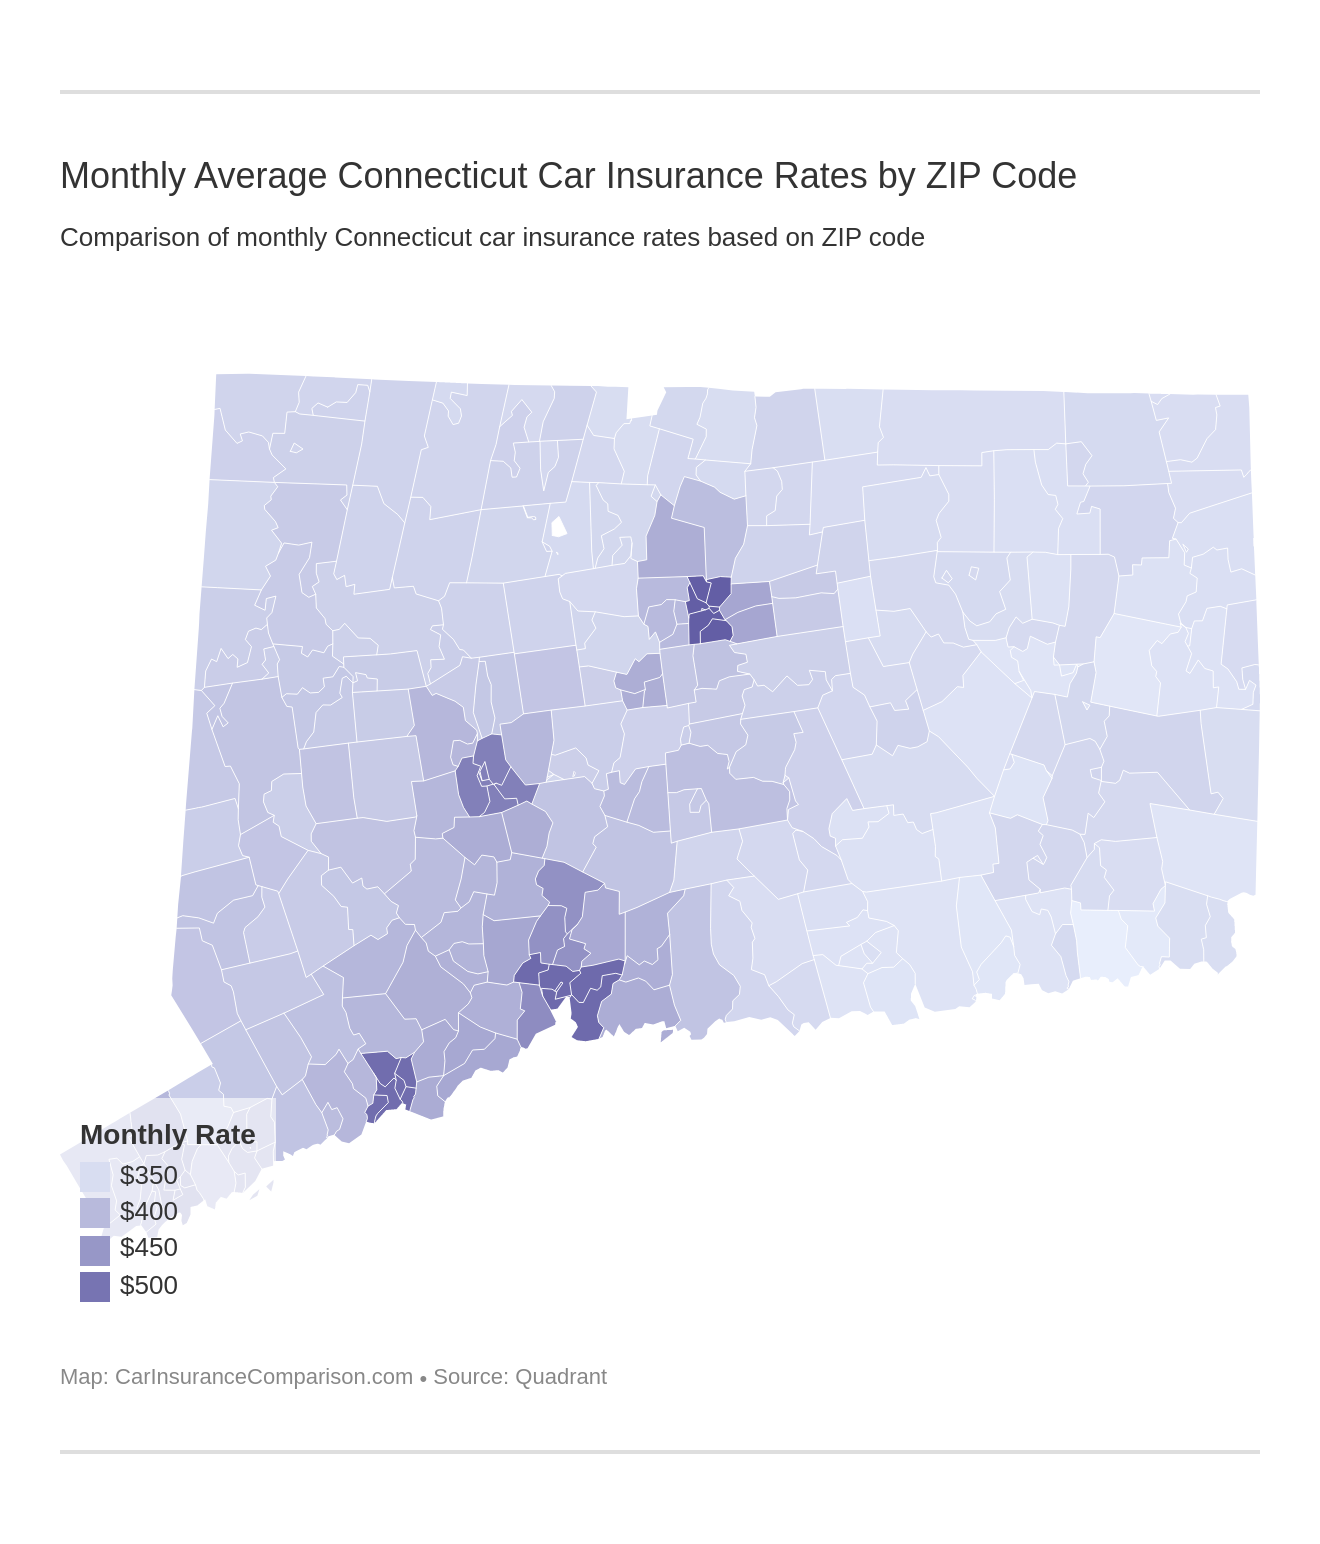 Monthly Average Connecticut Car Insurance Rates by ZIP Code